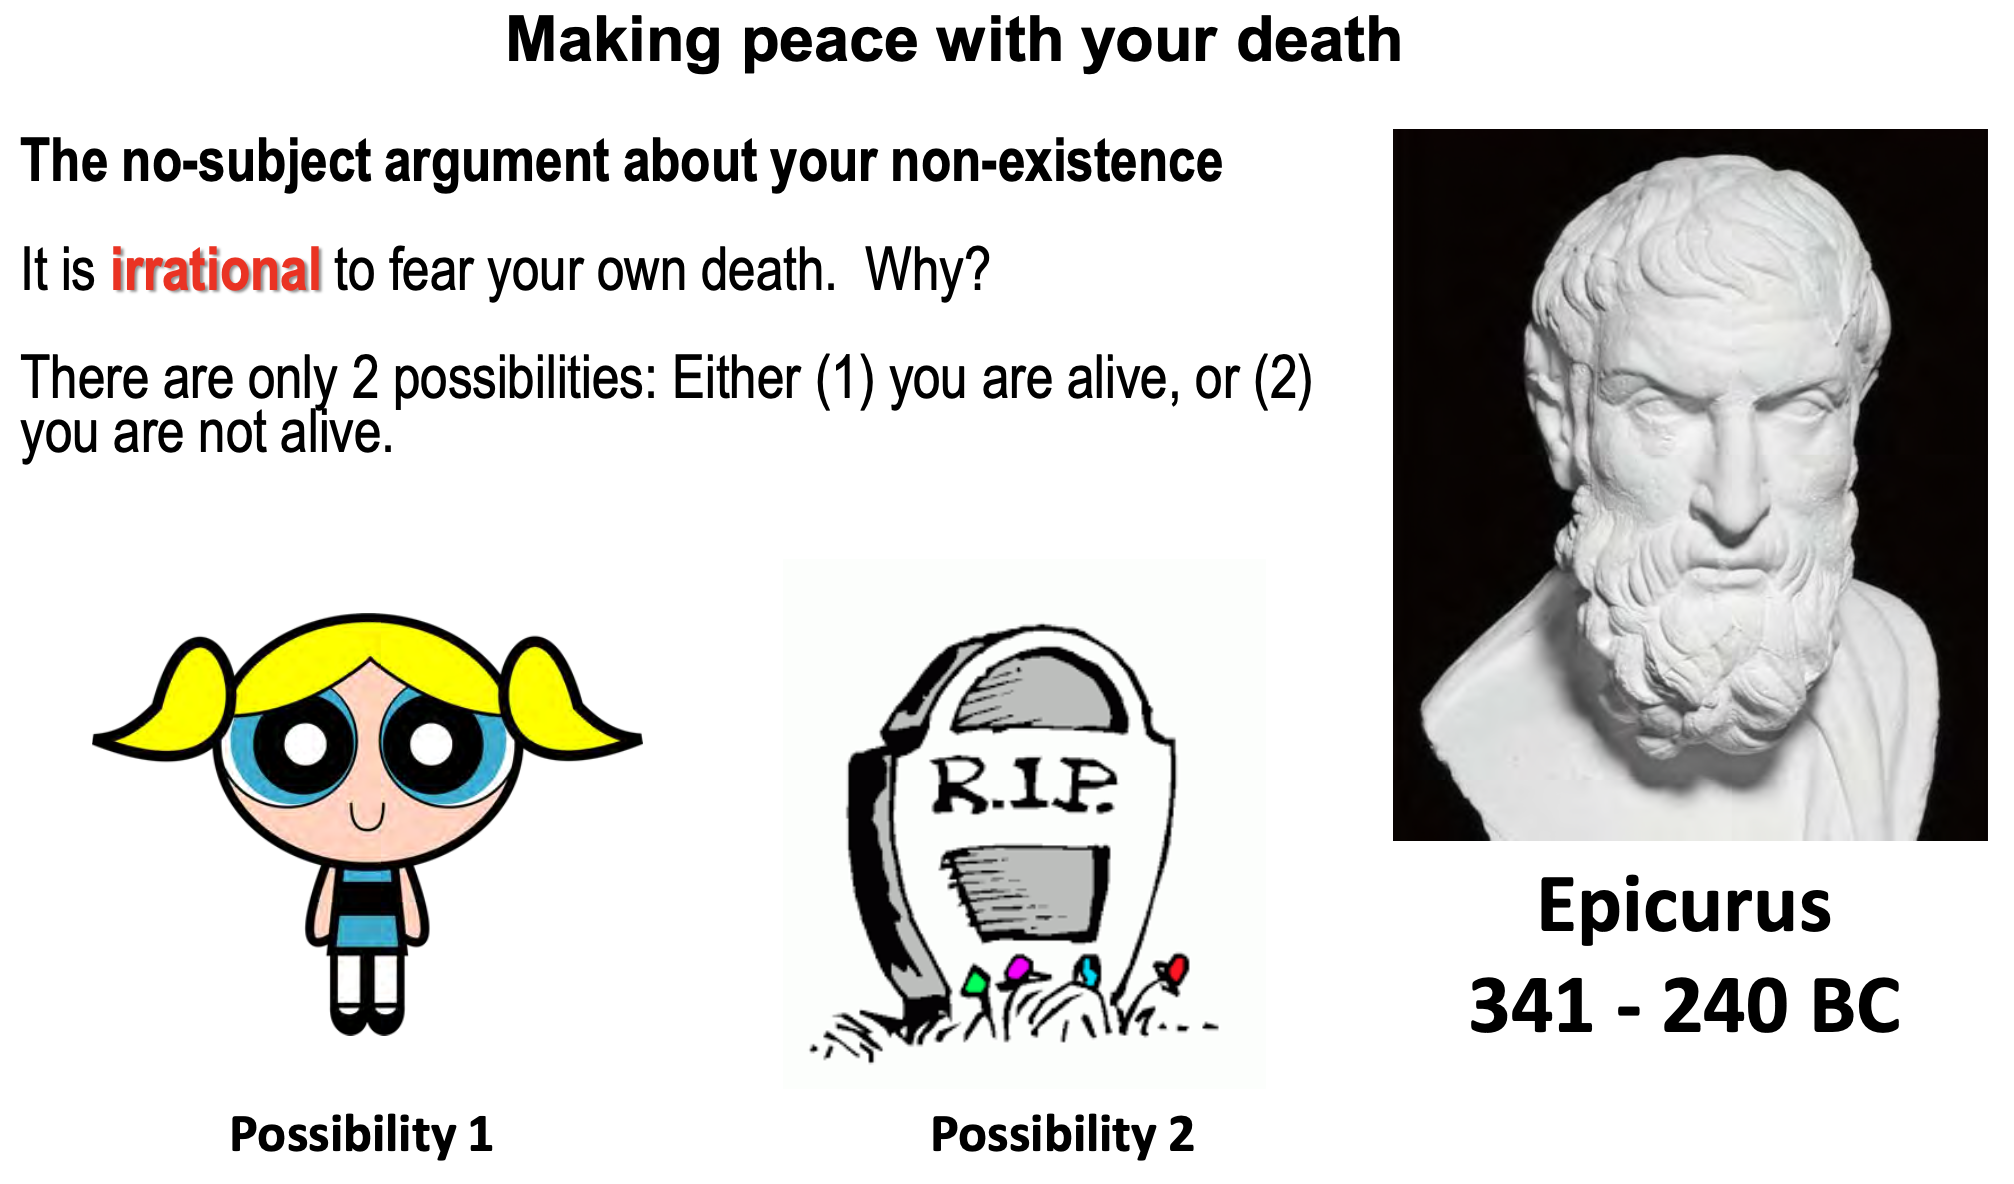 Making peace with your death